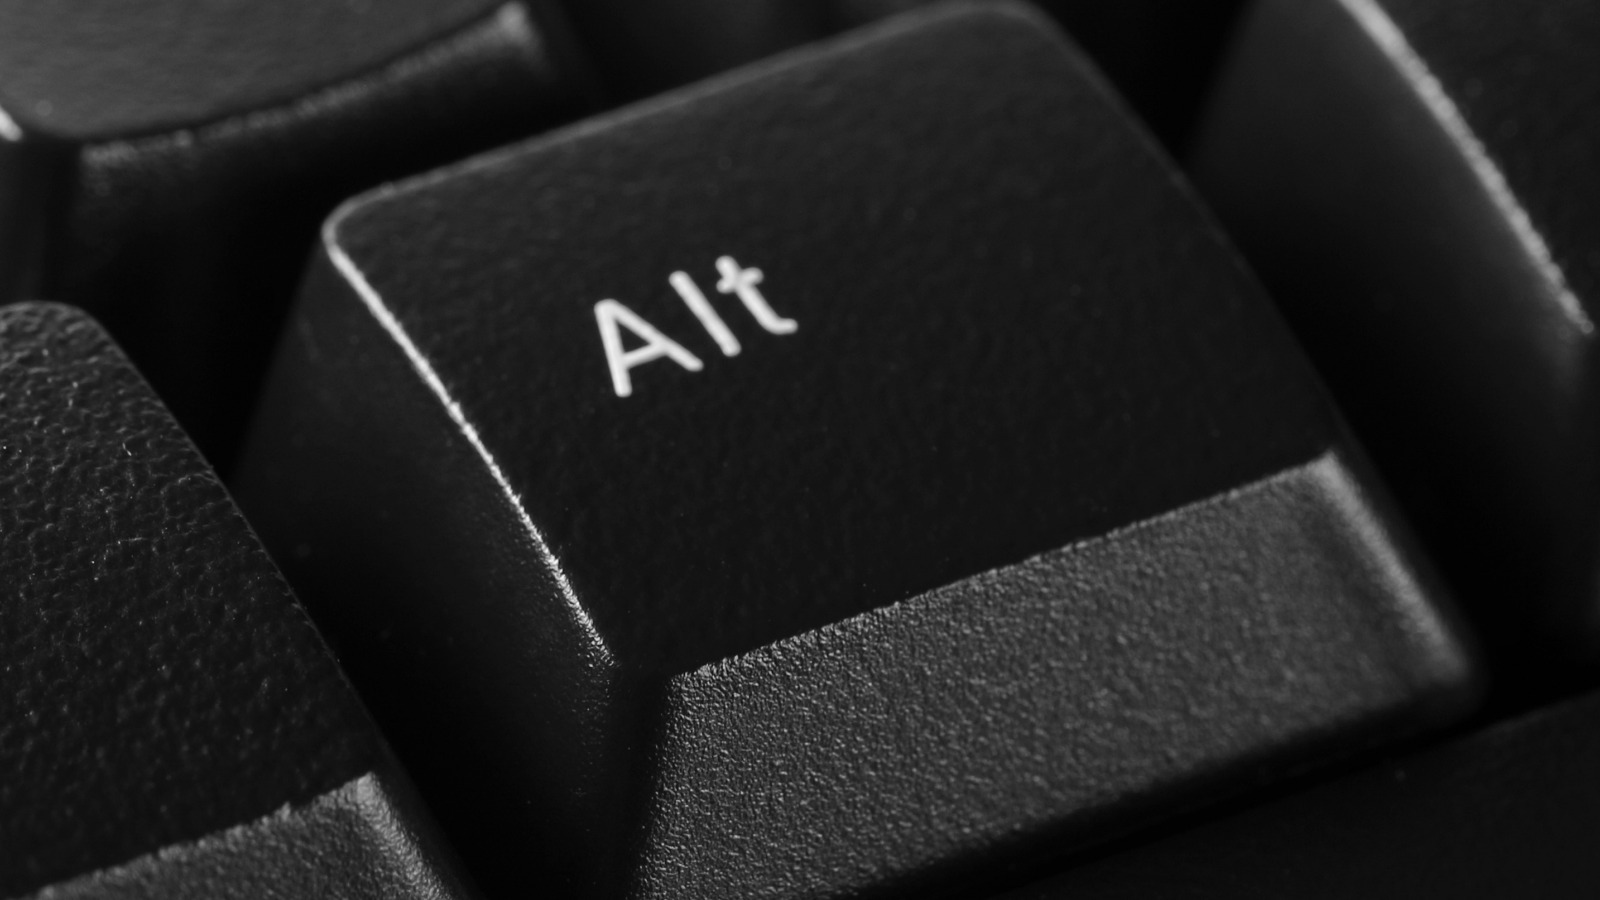 How To Find Where The Alt Key Is On Your Mac